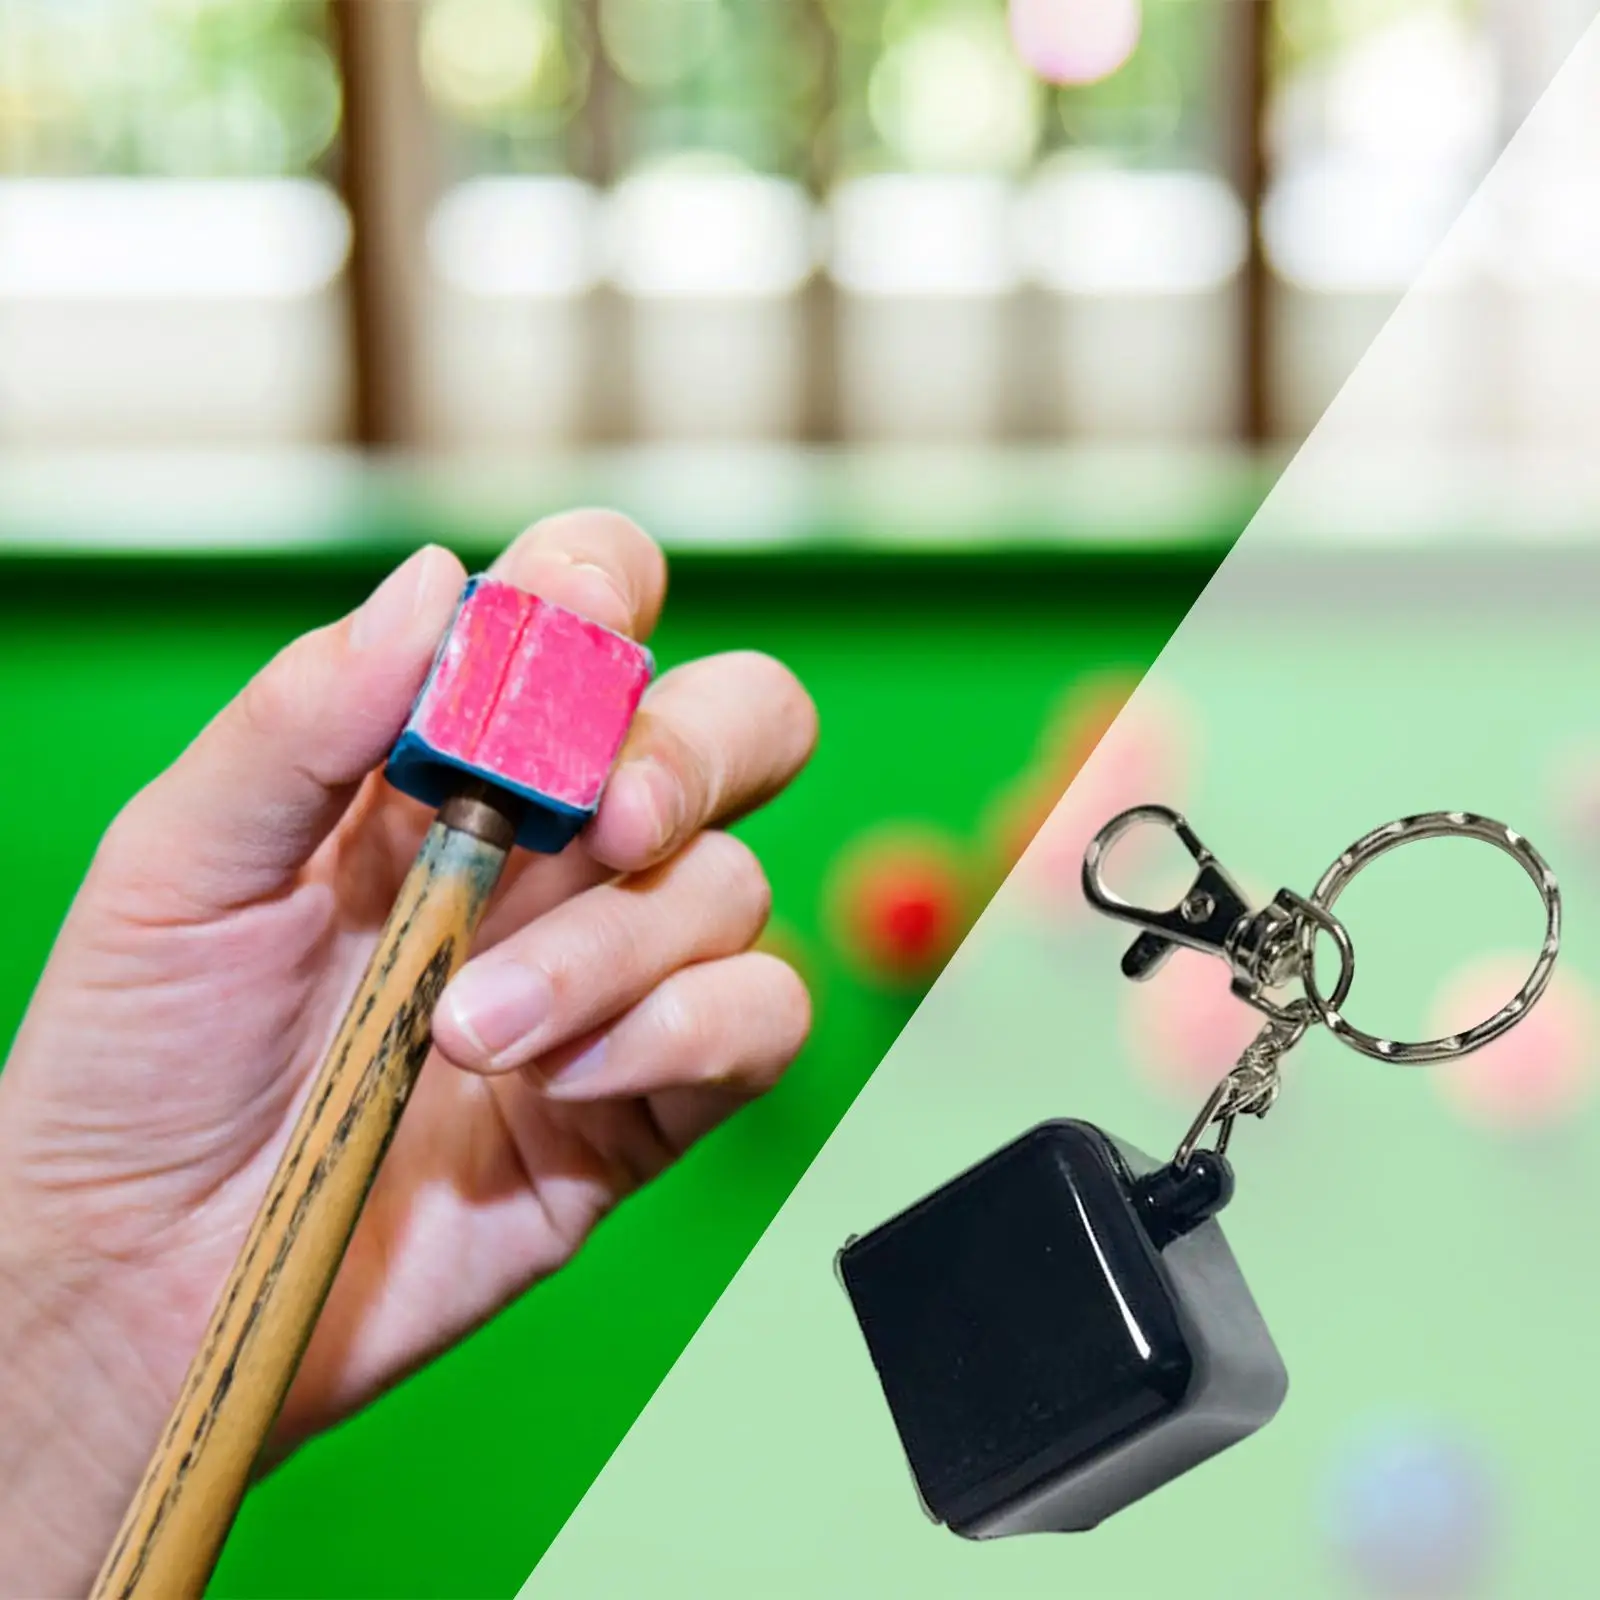 Billiards Snooker Pool Cue Chalk Holder Easy to Carry with Table Ball Keychains Durable for Pocket Chalkers Billiards Players